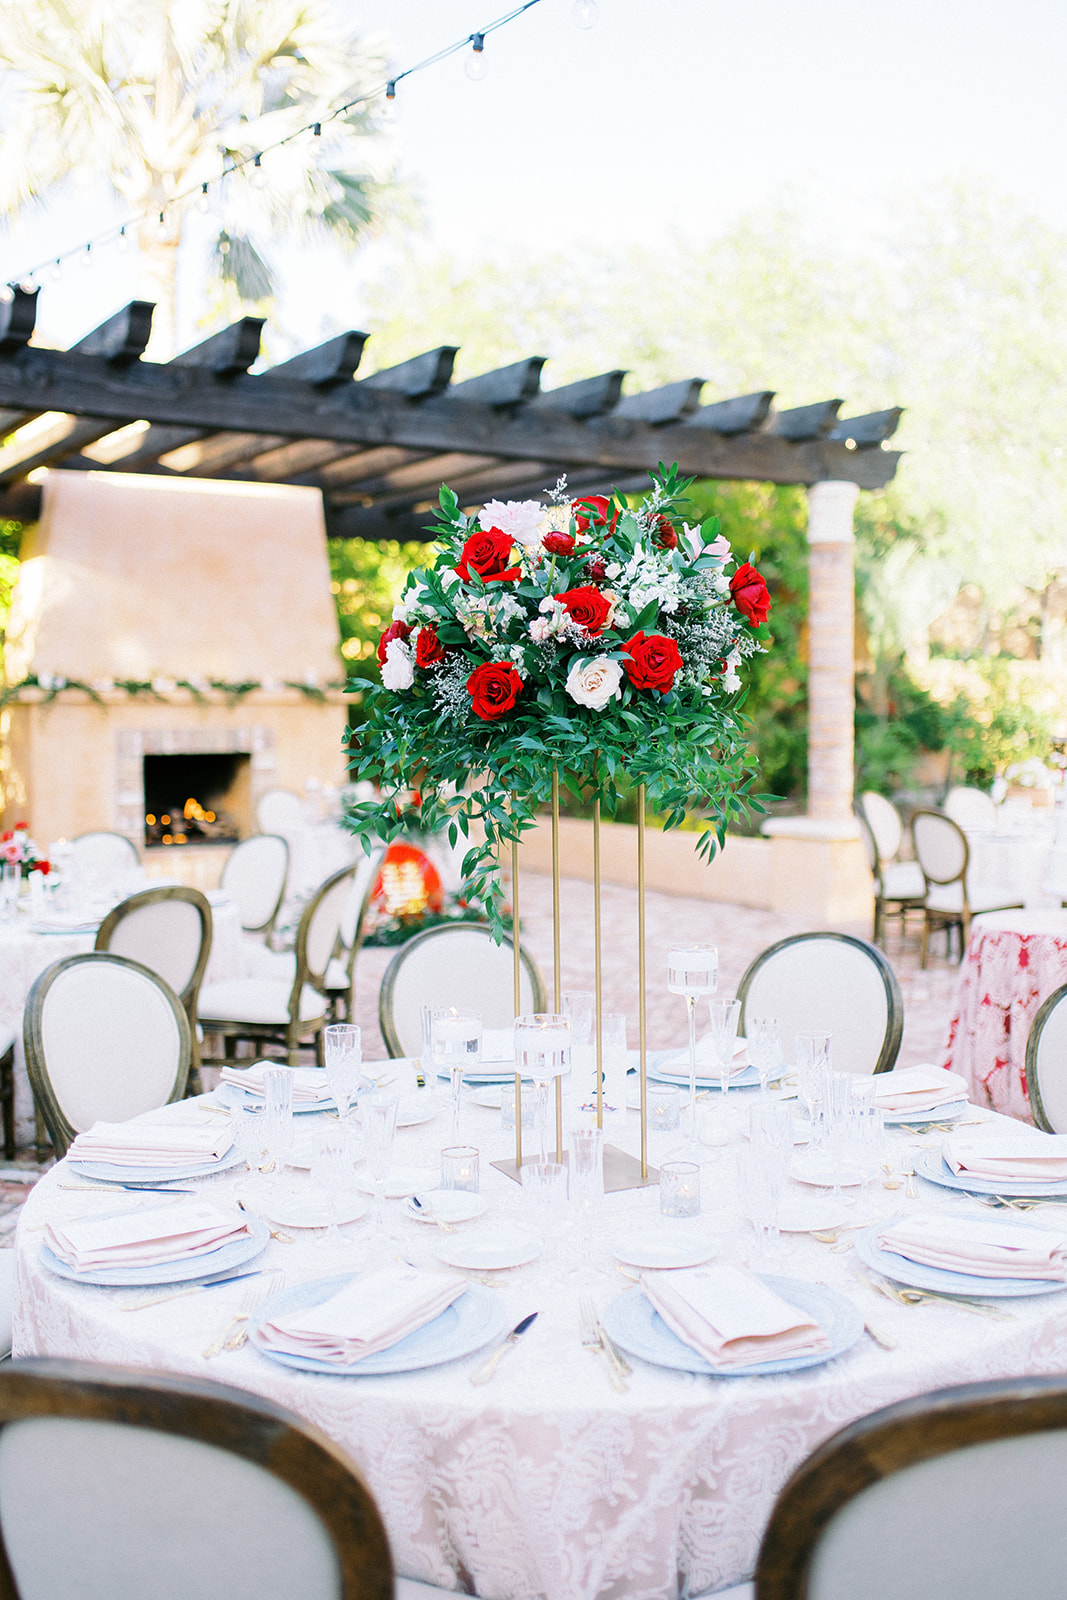 Tall brass wedding reception centerpiece of greenery and white, pink and red roses on round table.